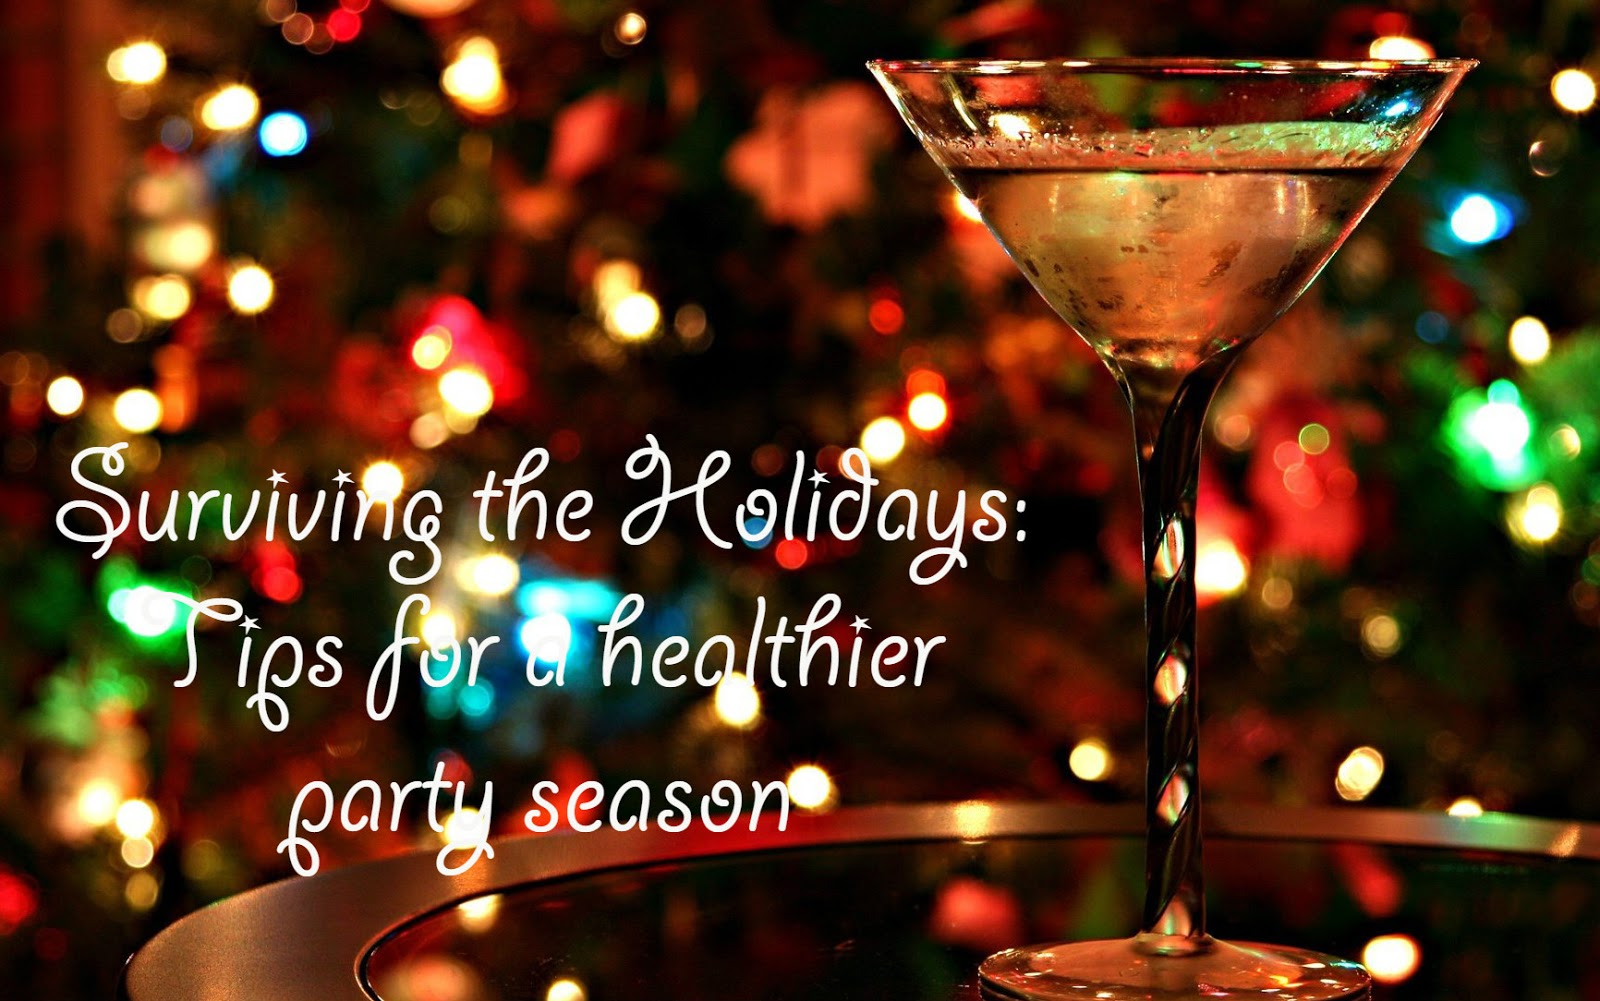 Surviving the Holidays: Tips for a healthier party season